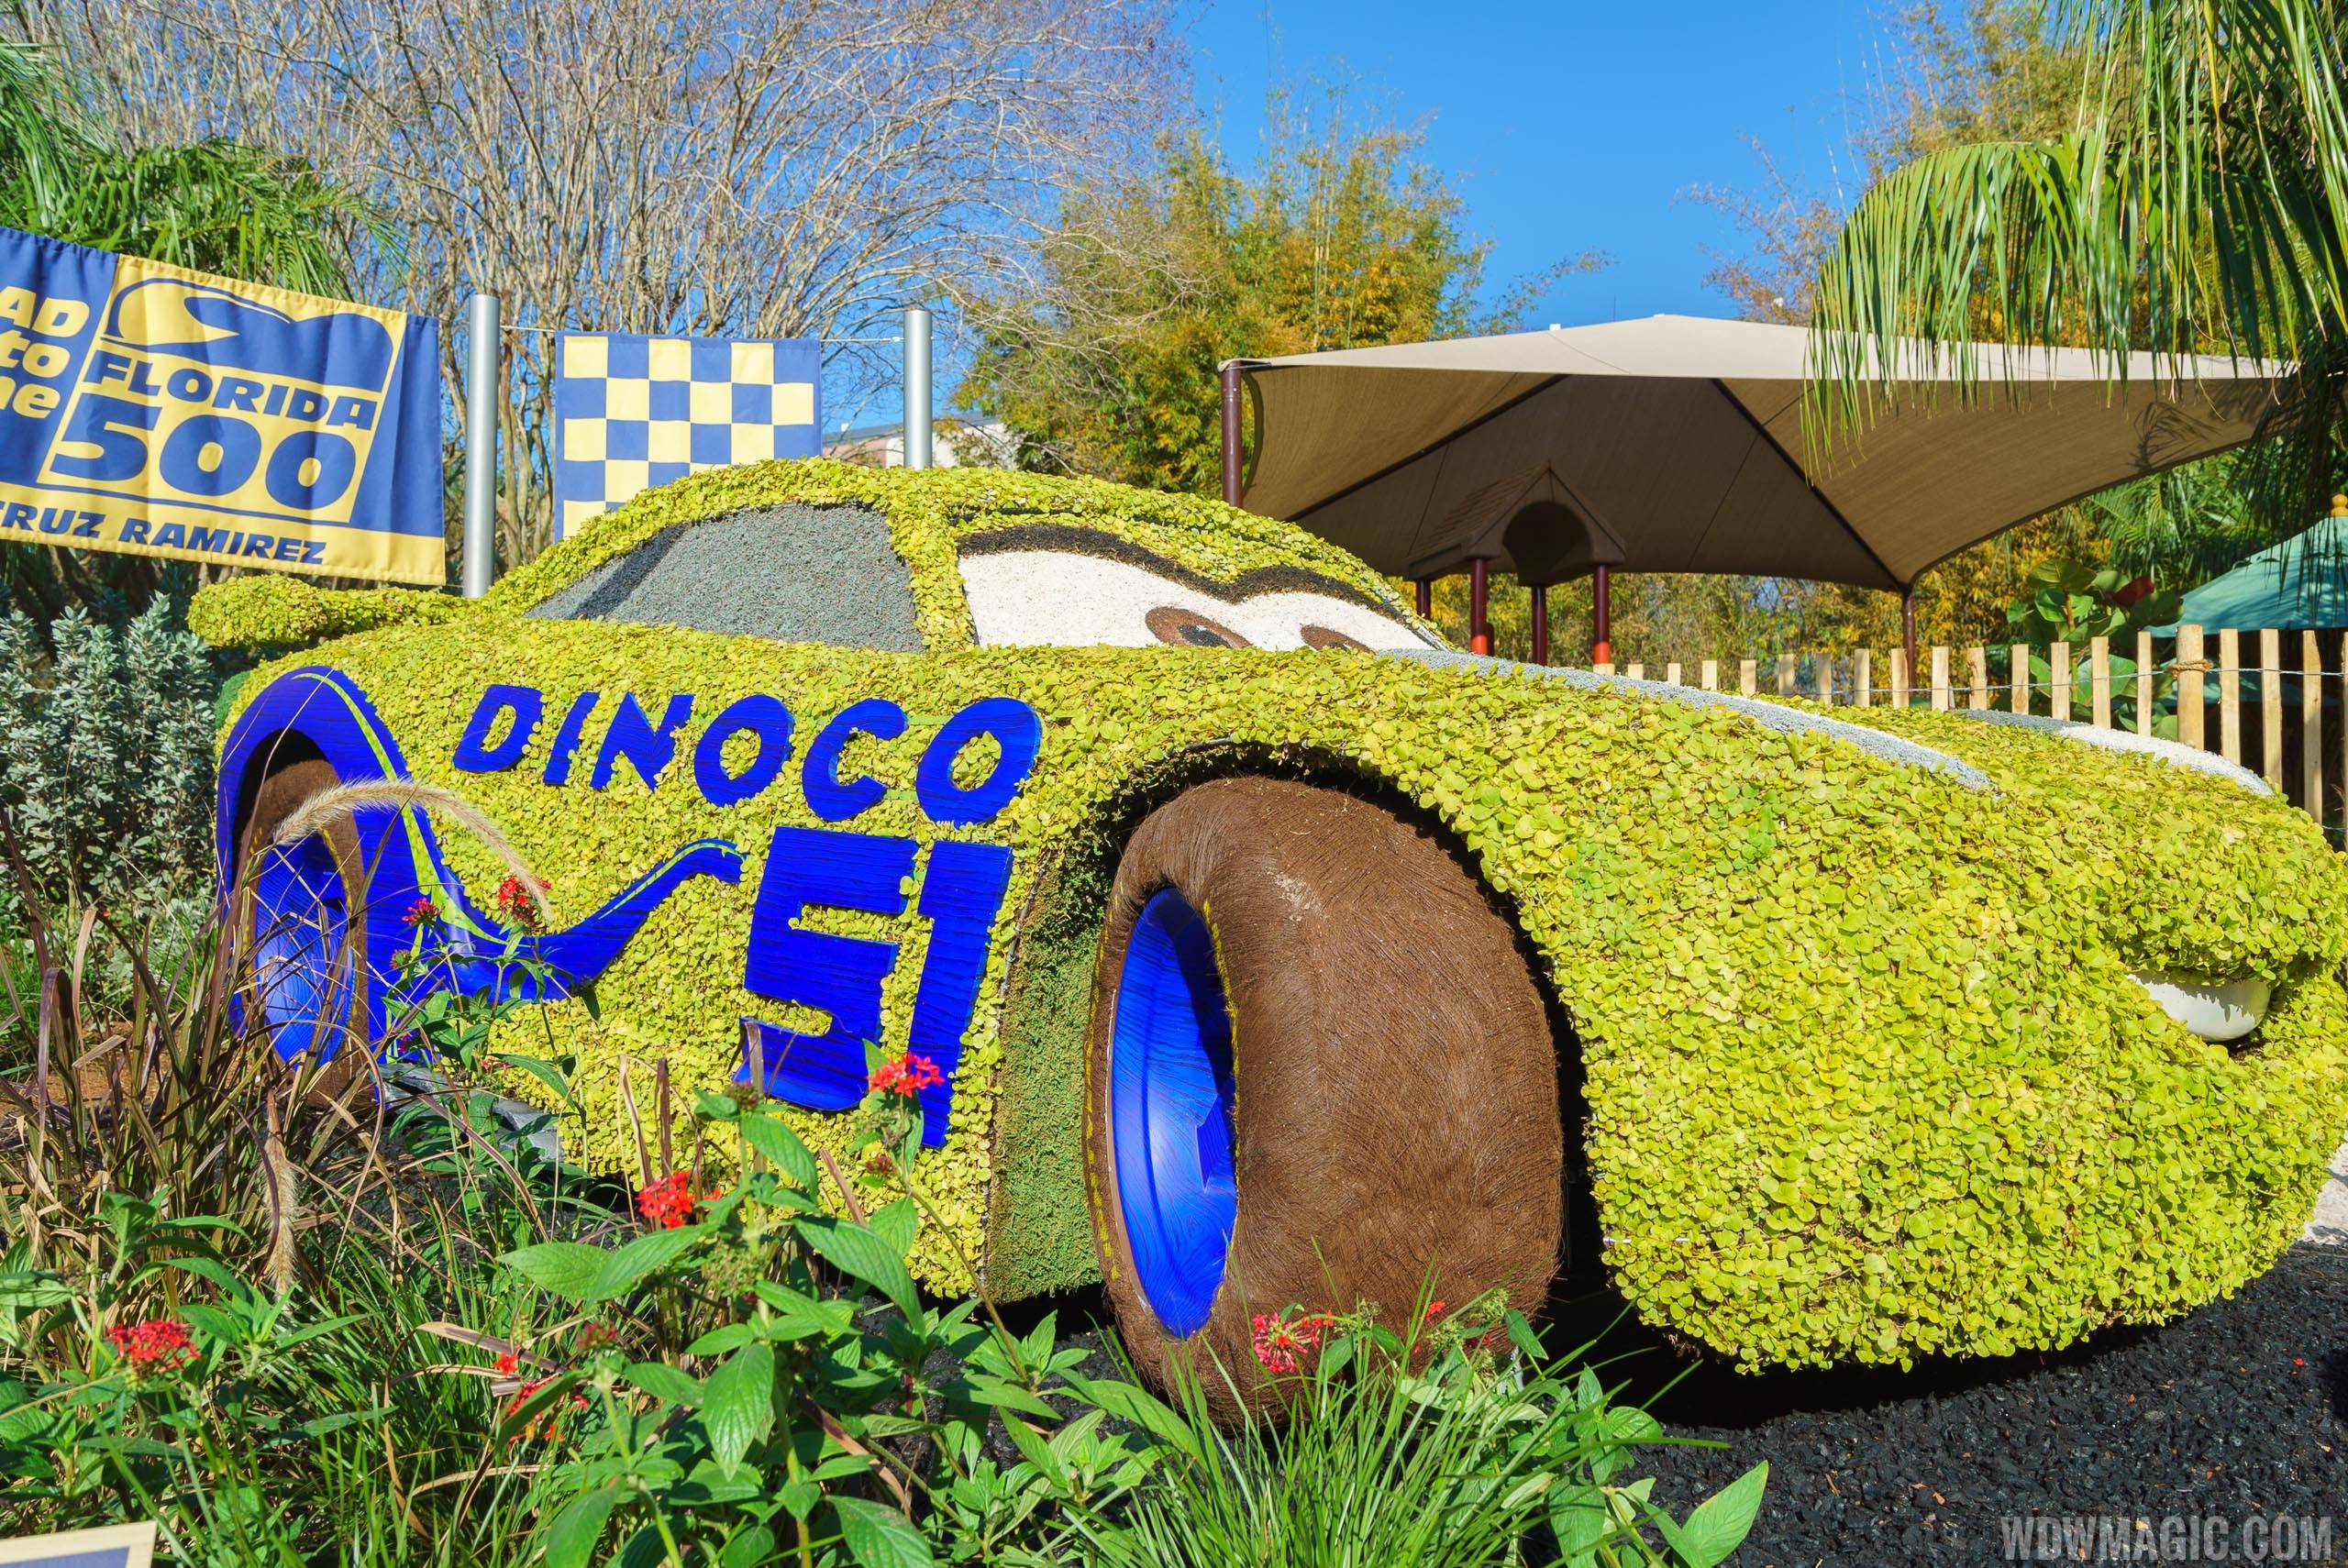 2017 Flower and Garden Festival - Cruz topiary from Cars 3